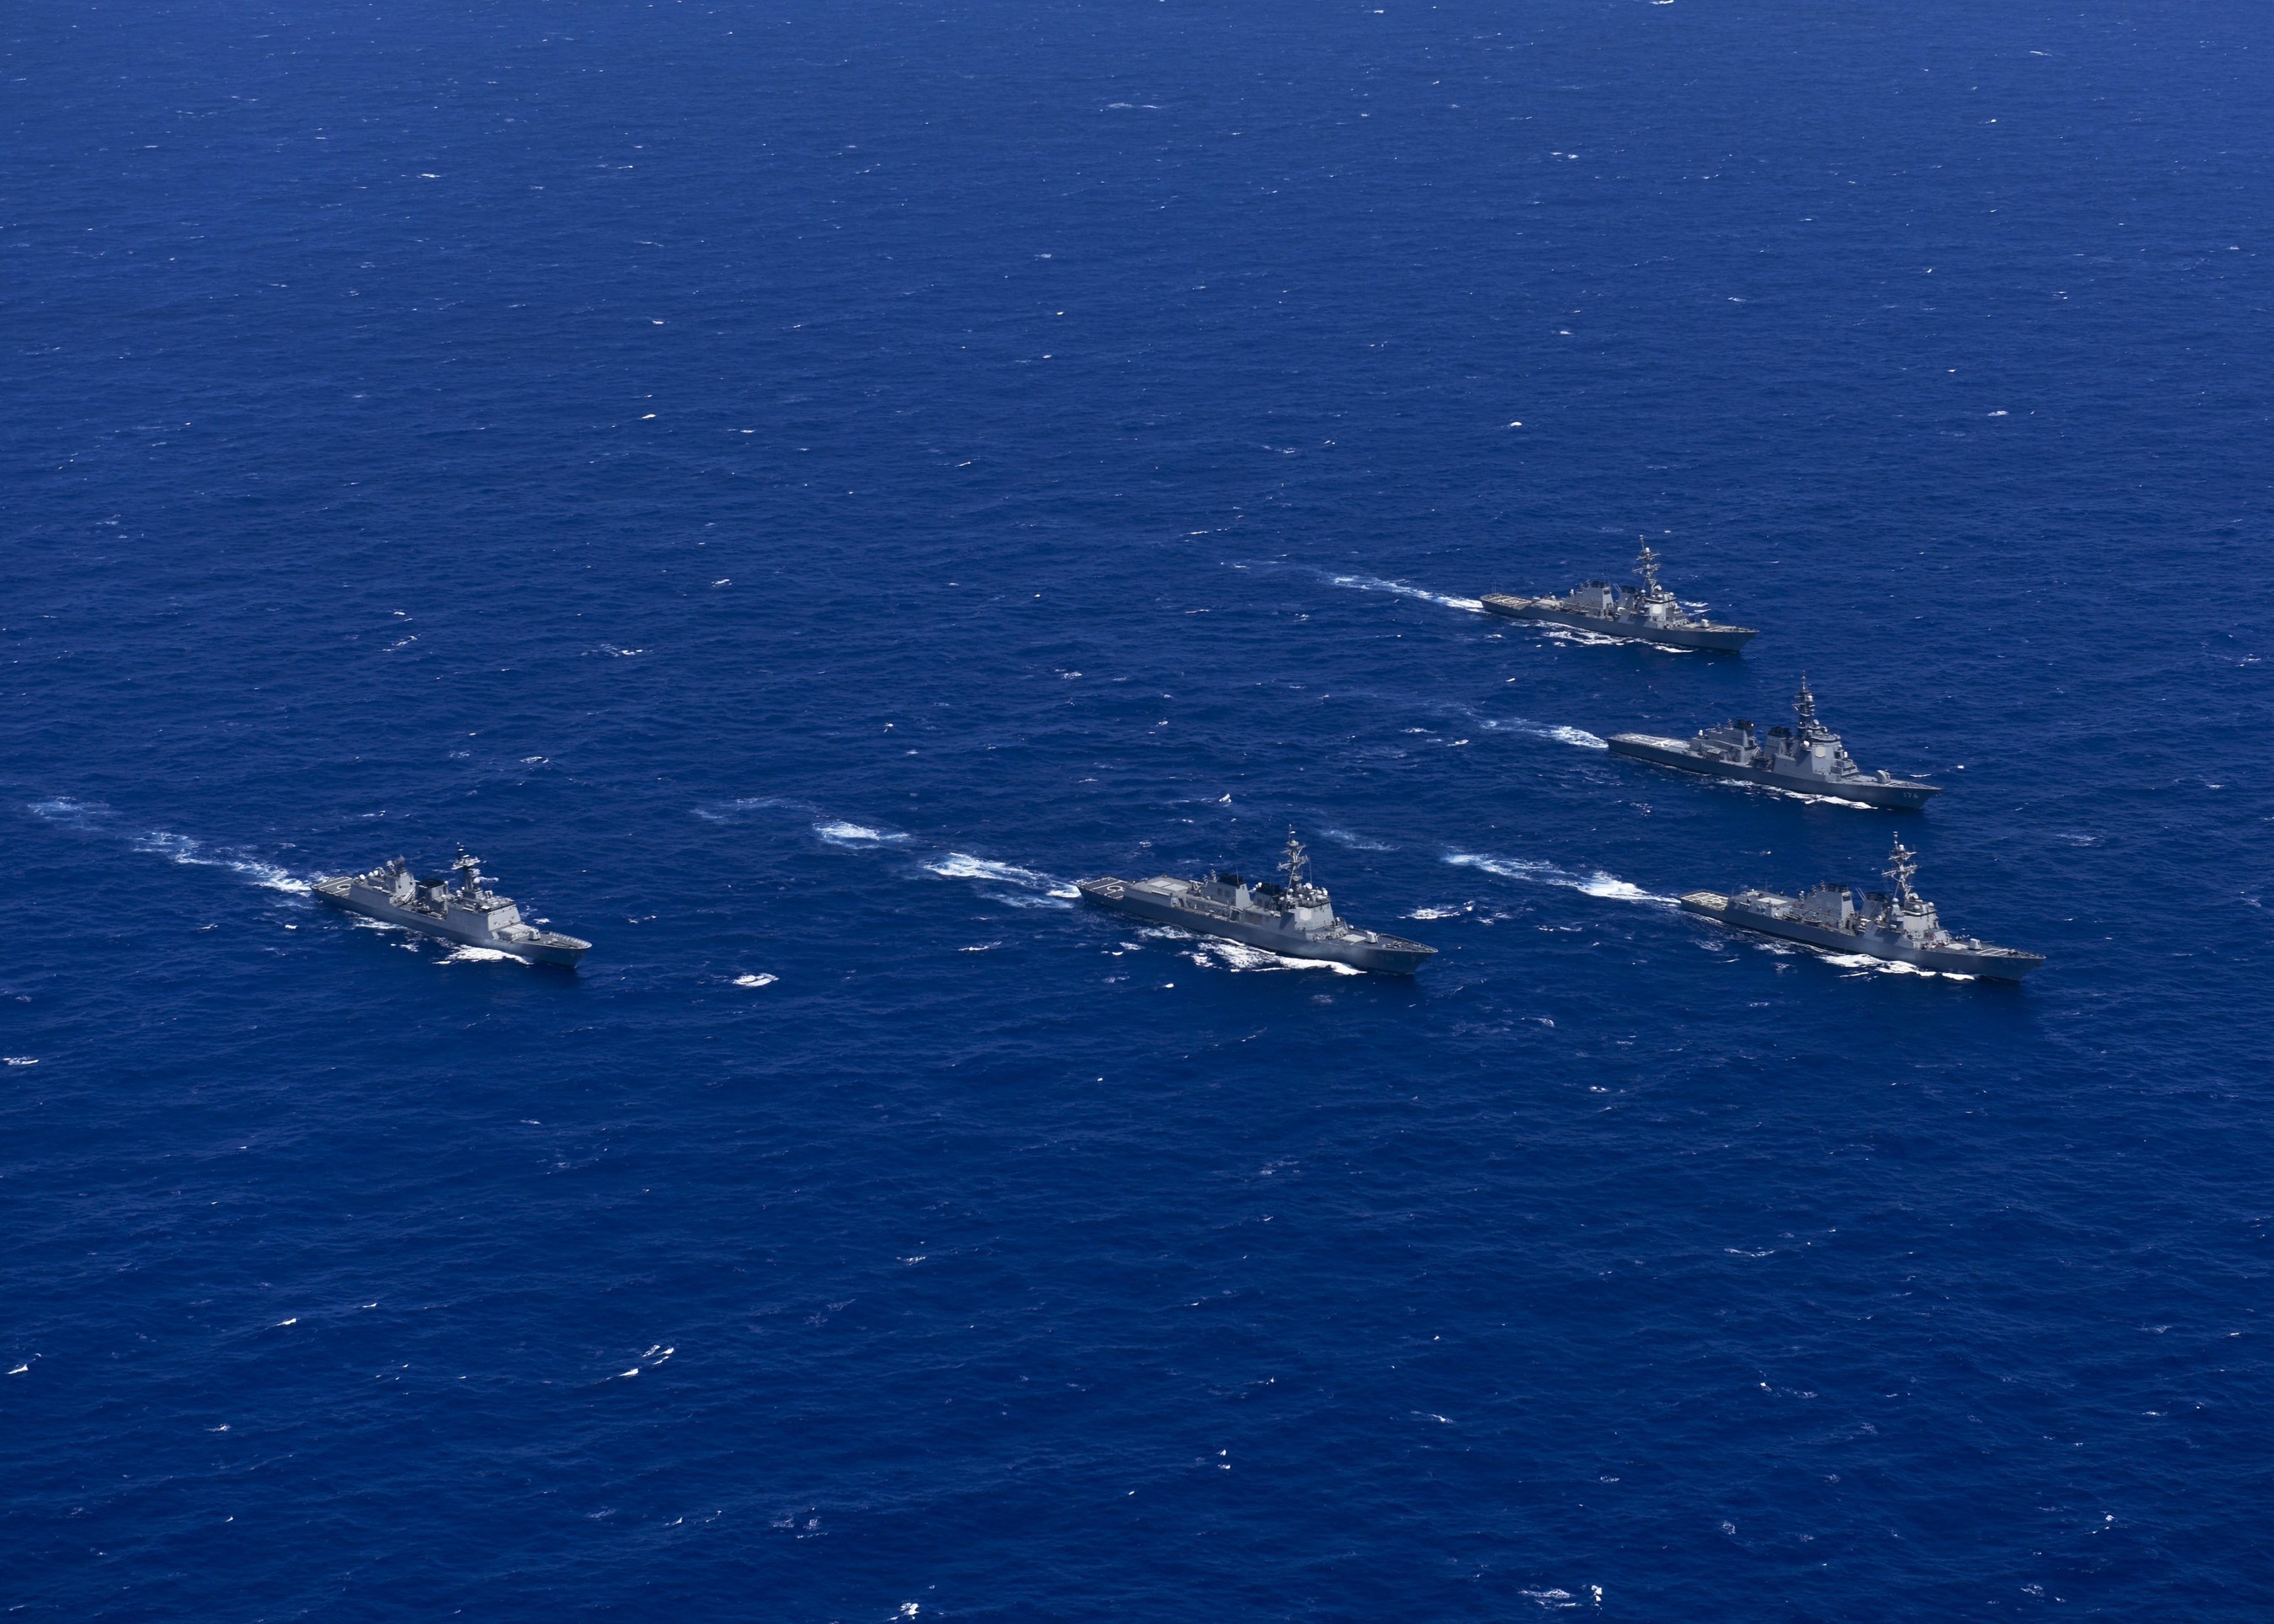 USS John Paul Jones (DDG 53), USS Shoup (DDG 86), Japan's Chokai (DDG 176), the Republic of Korea's Sejung The Great (DDG 991) and Gang Gam Chan (DDH 979) steam in formation during exercise Pacific Dragon 2016 in June. Pacific Dragon is a trilateral Ballistic Missile Defense tracking event between the U.S. Navy, Japan Maritime Self Defense Force and Republic of Korea Navy. (U.S. Navy photo by Mass Communication Specialist 3rd Class Holly L. Herline/Released)